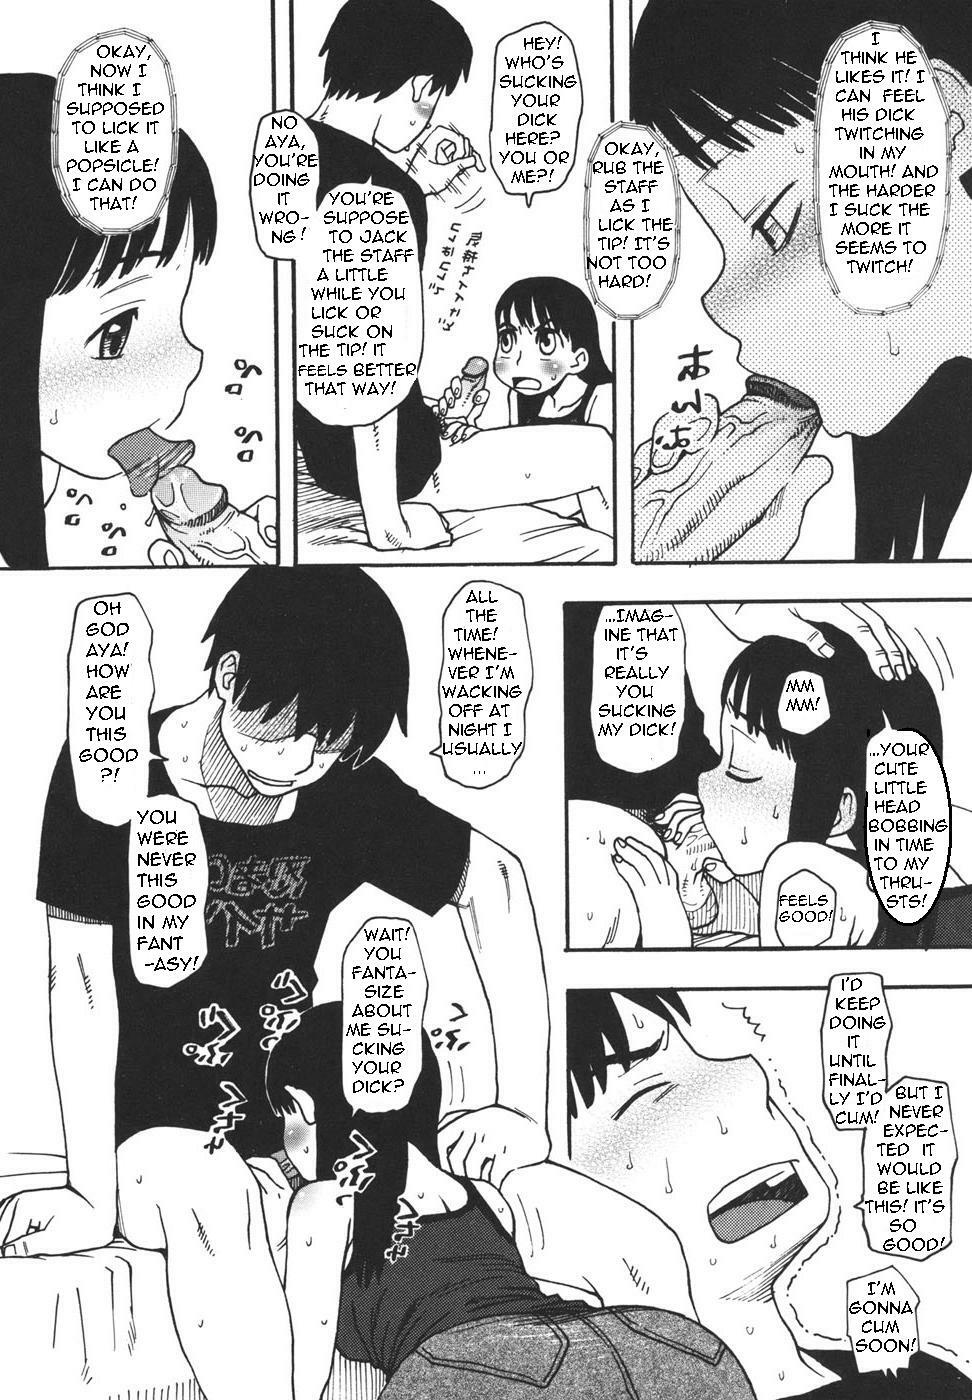 Her Brother Talks Her Into It [English] [Rewrite] [Bolt] page 11 full